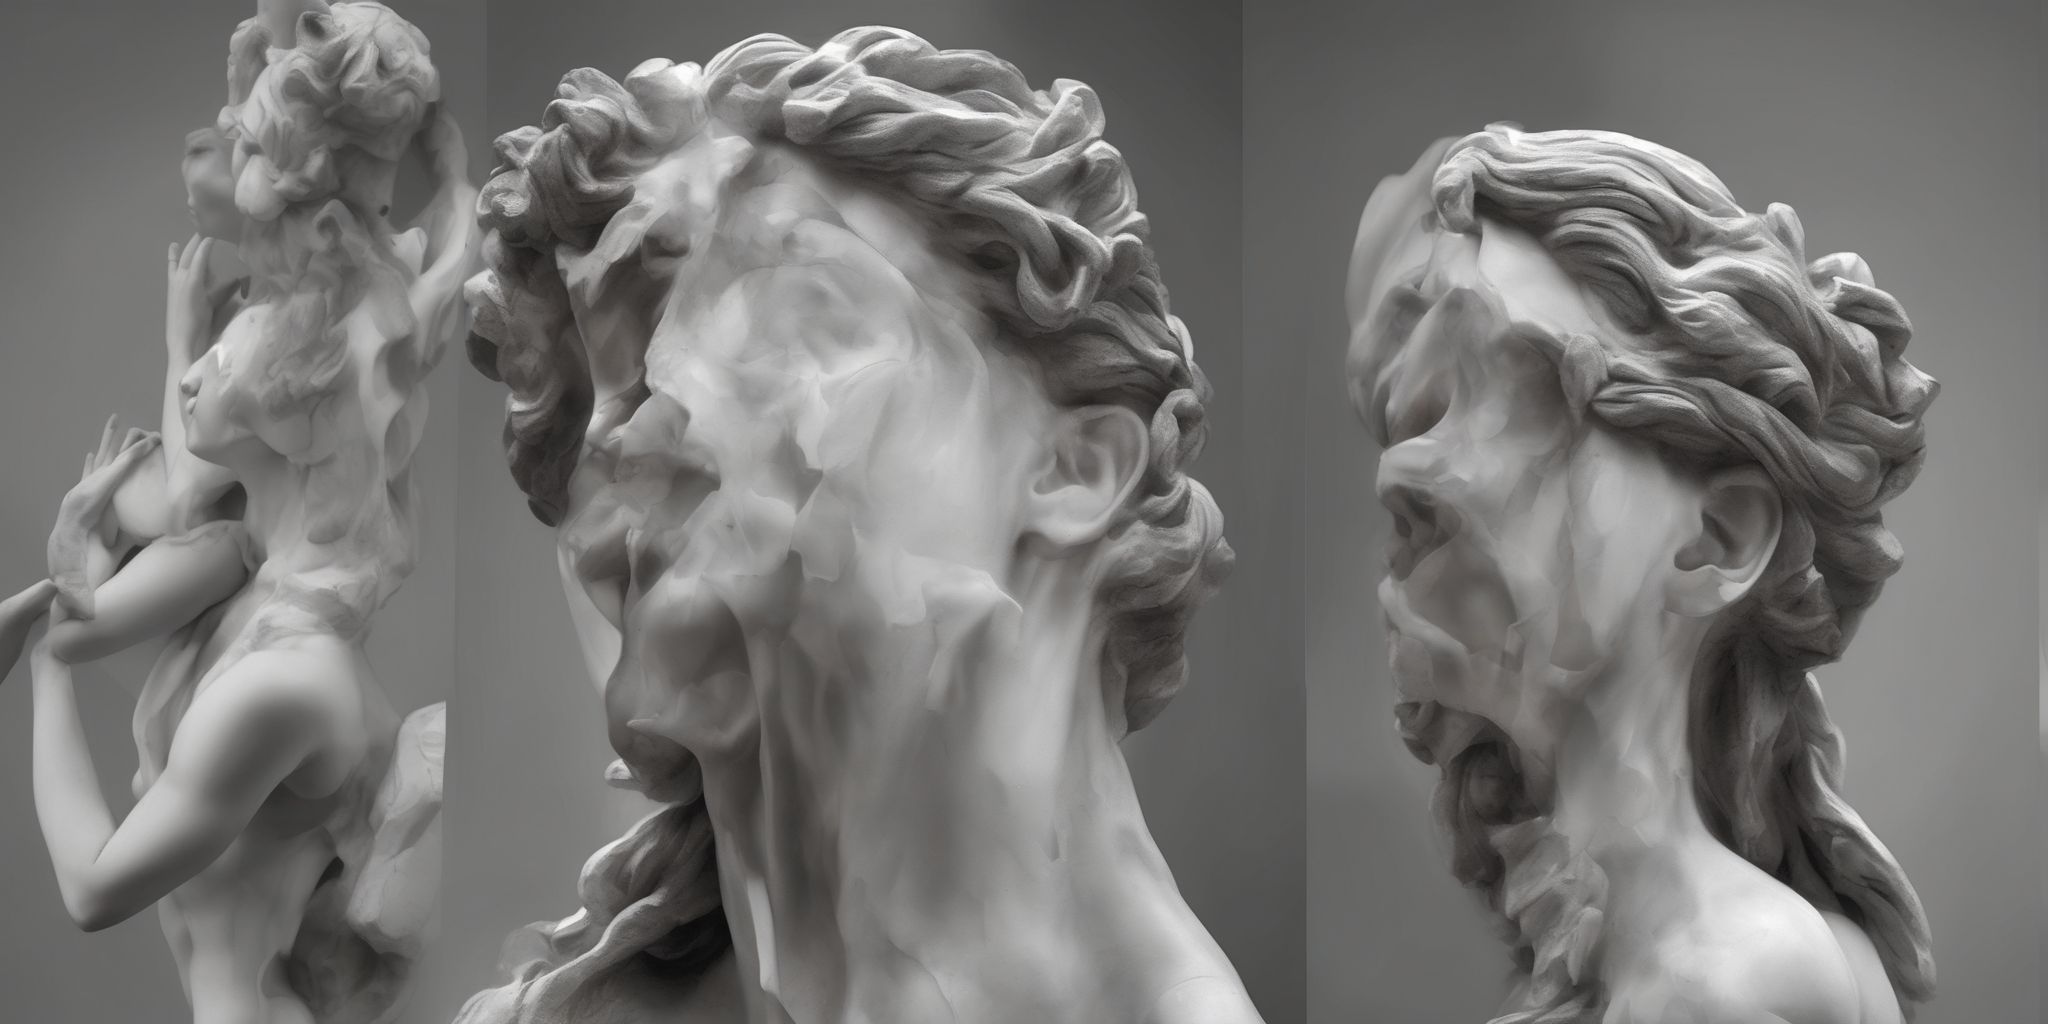 Sculpture  in realistic, photographic style